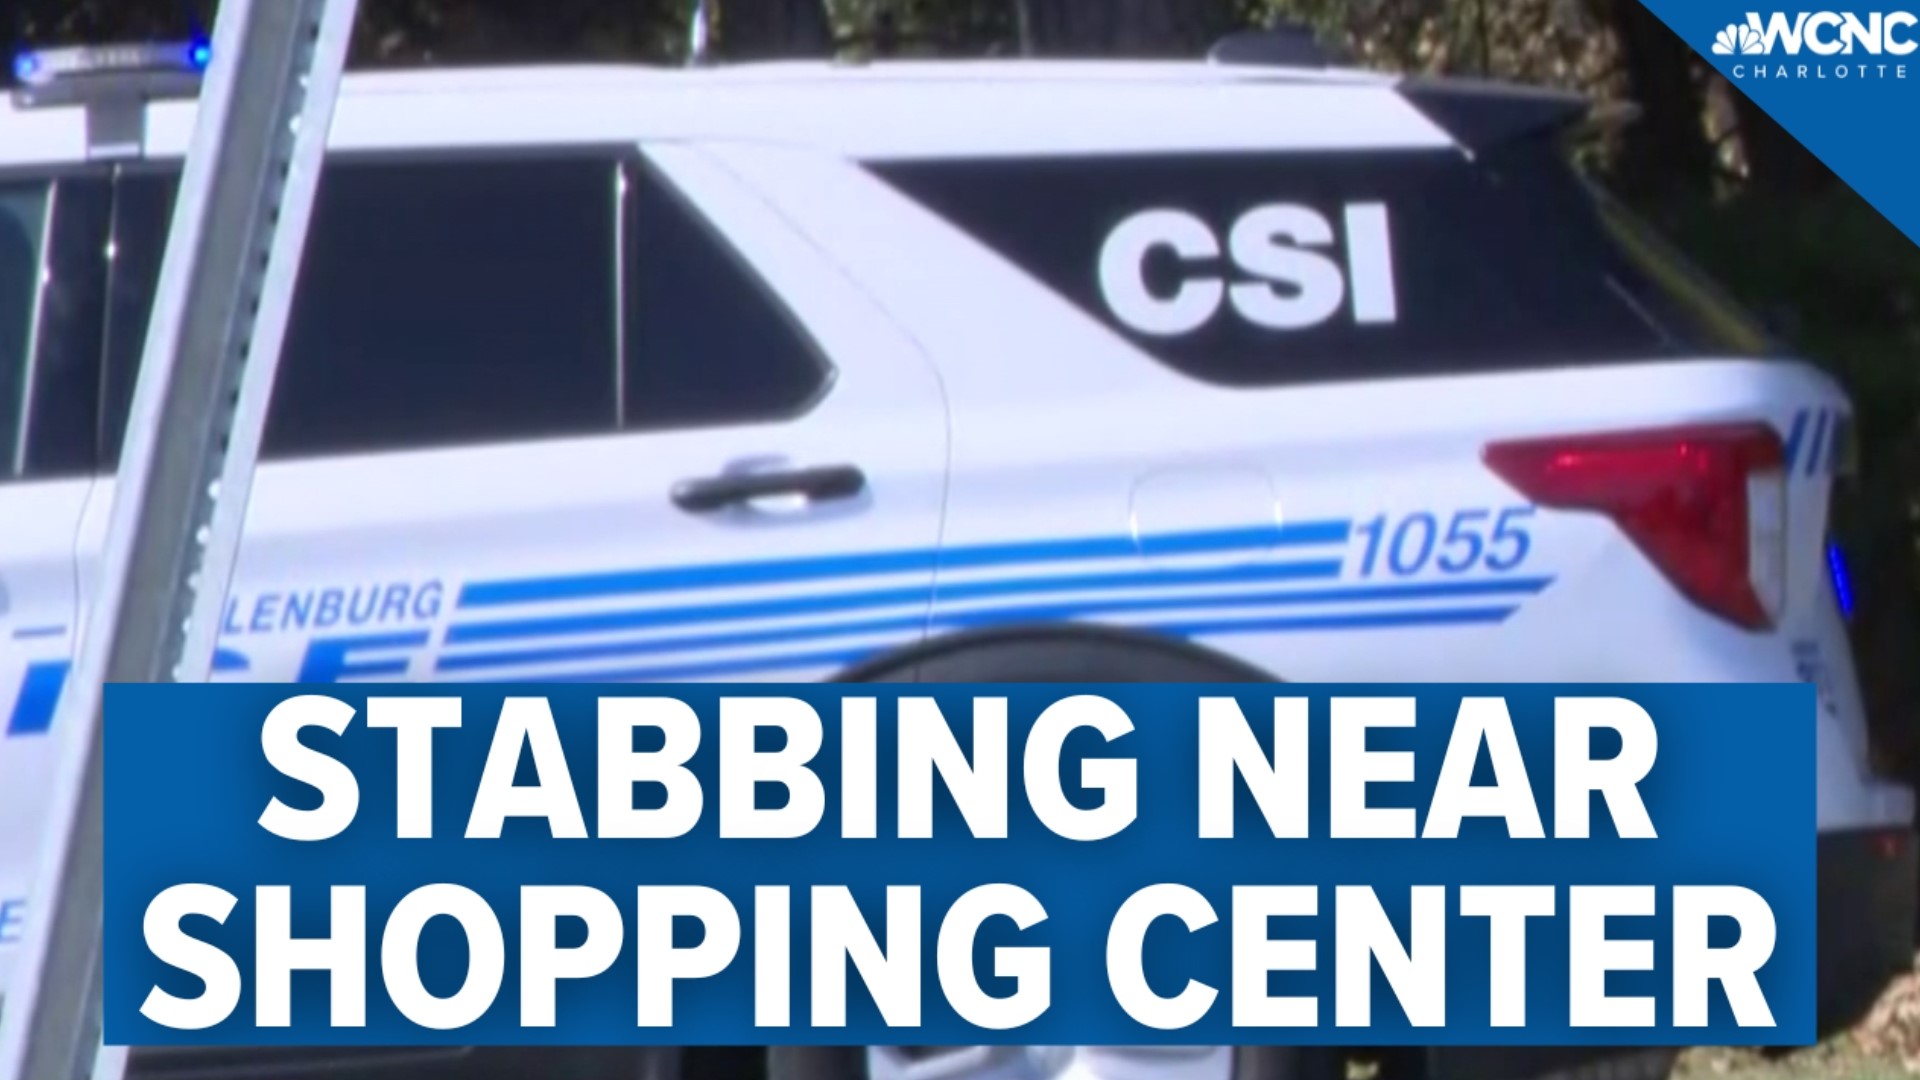 Three people were detained following a reported stabbing near the Whitehall Commons shopping center along South Tryon Street, police said.